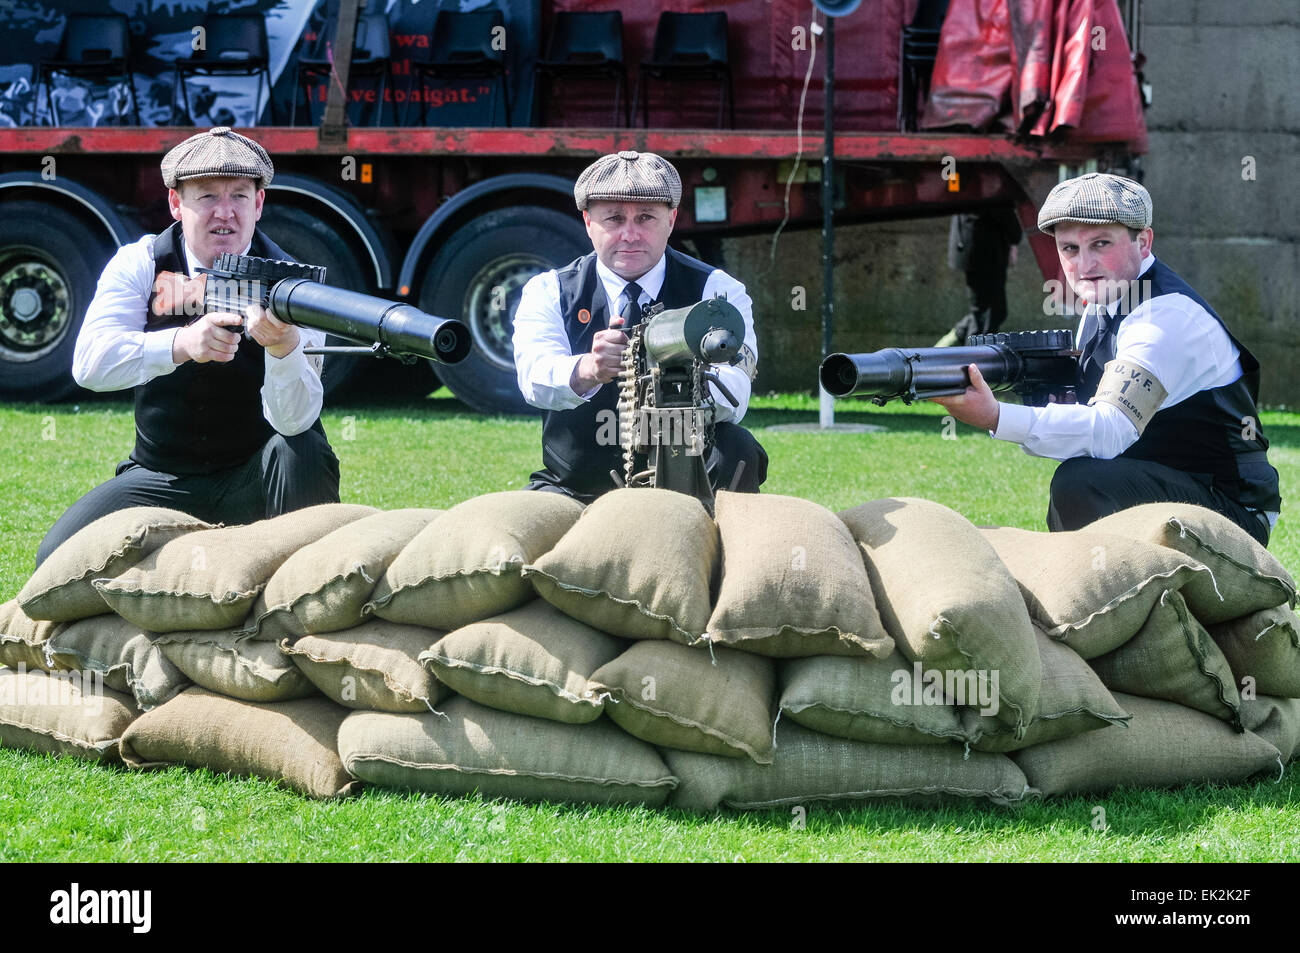 Larne, Northern Ireland. 26 Apr 2014 - Three men wearing period costumes hold a Vickers Light machine gun and two Lewis Automatic  machine guns as part of the commemoration of the 1912 UVF gun-running Stock Photo